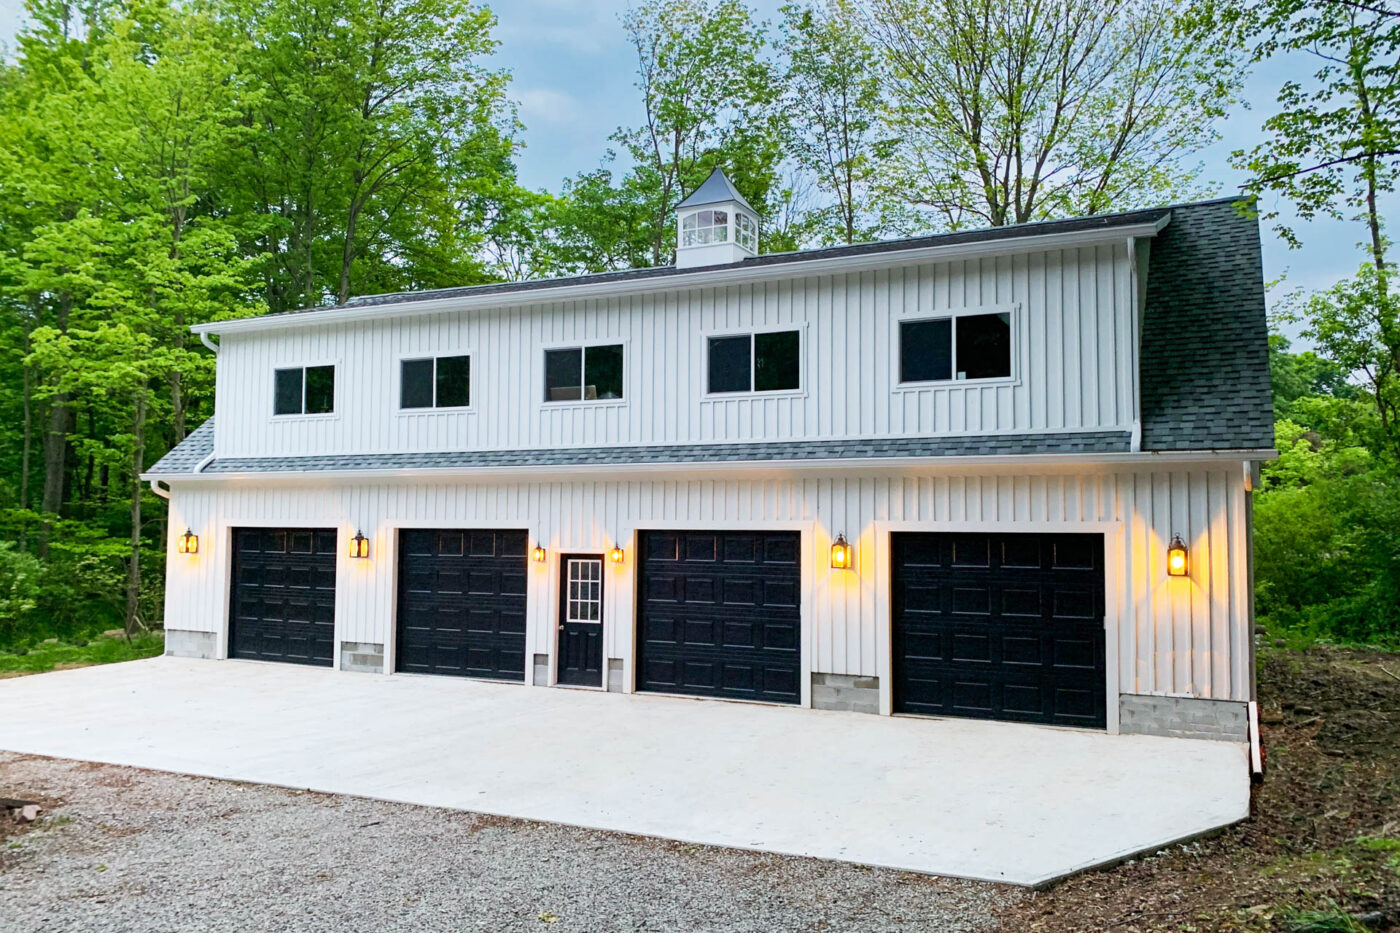 4 car garage for sale in NY 6